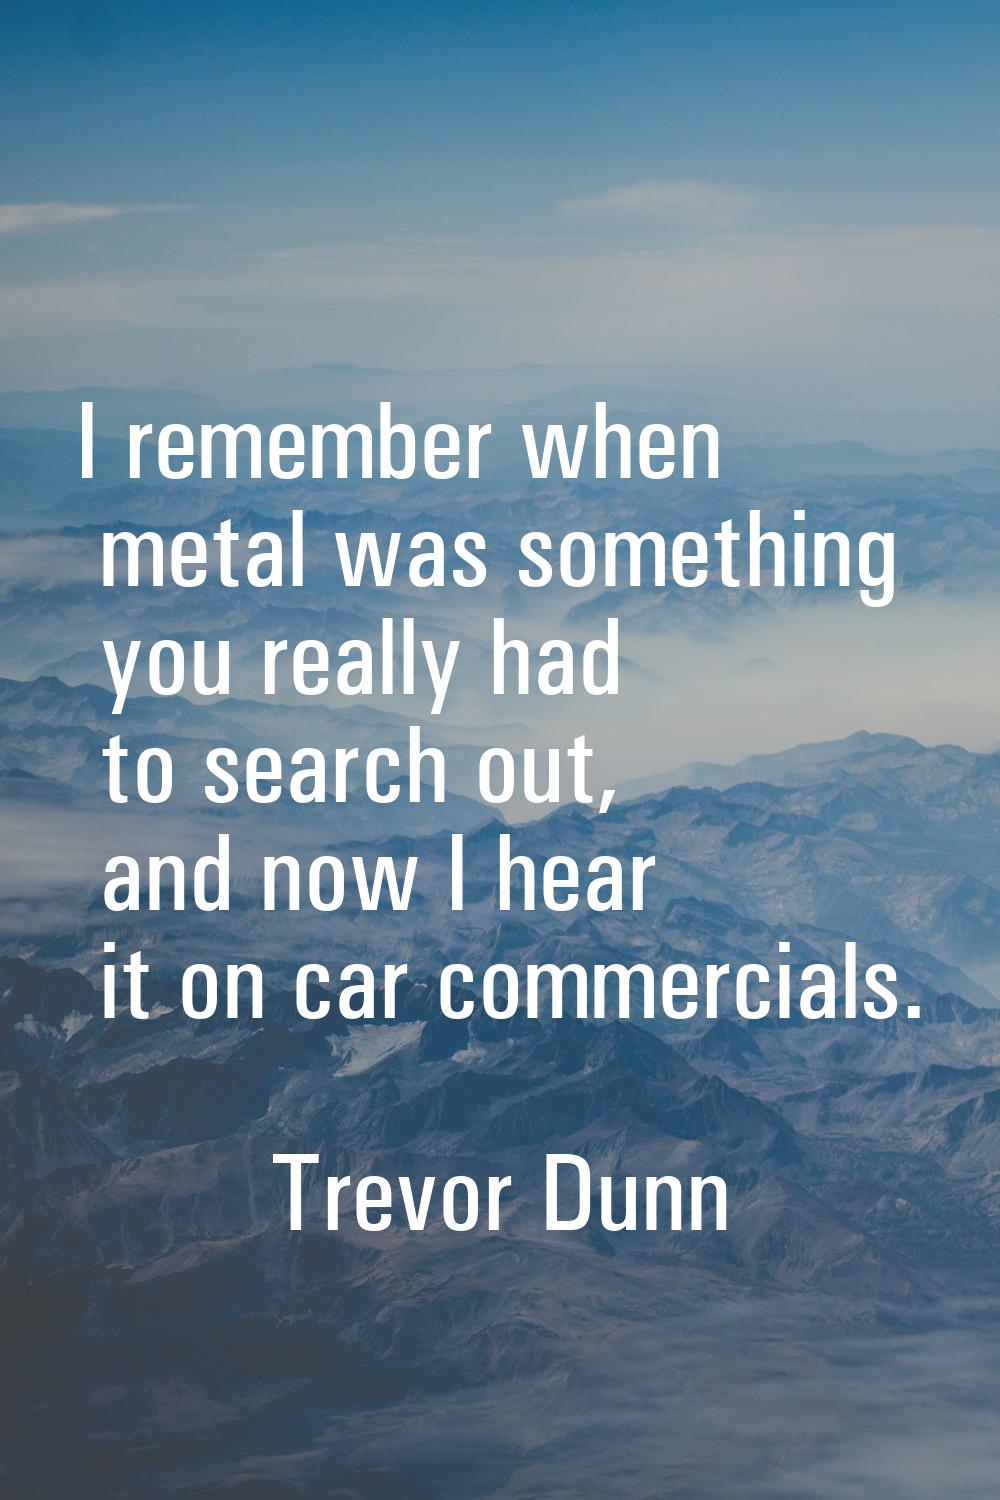 I remember when metal was something you really had to search out, and now I hear it on car commerci